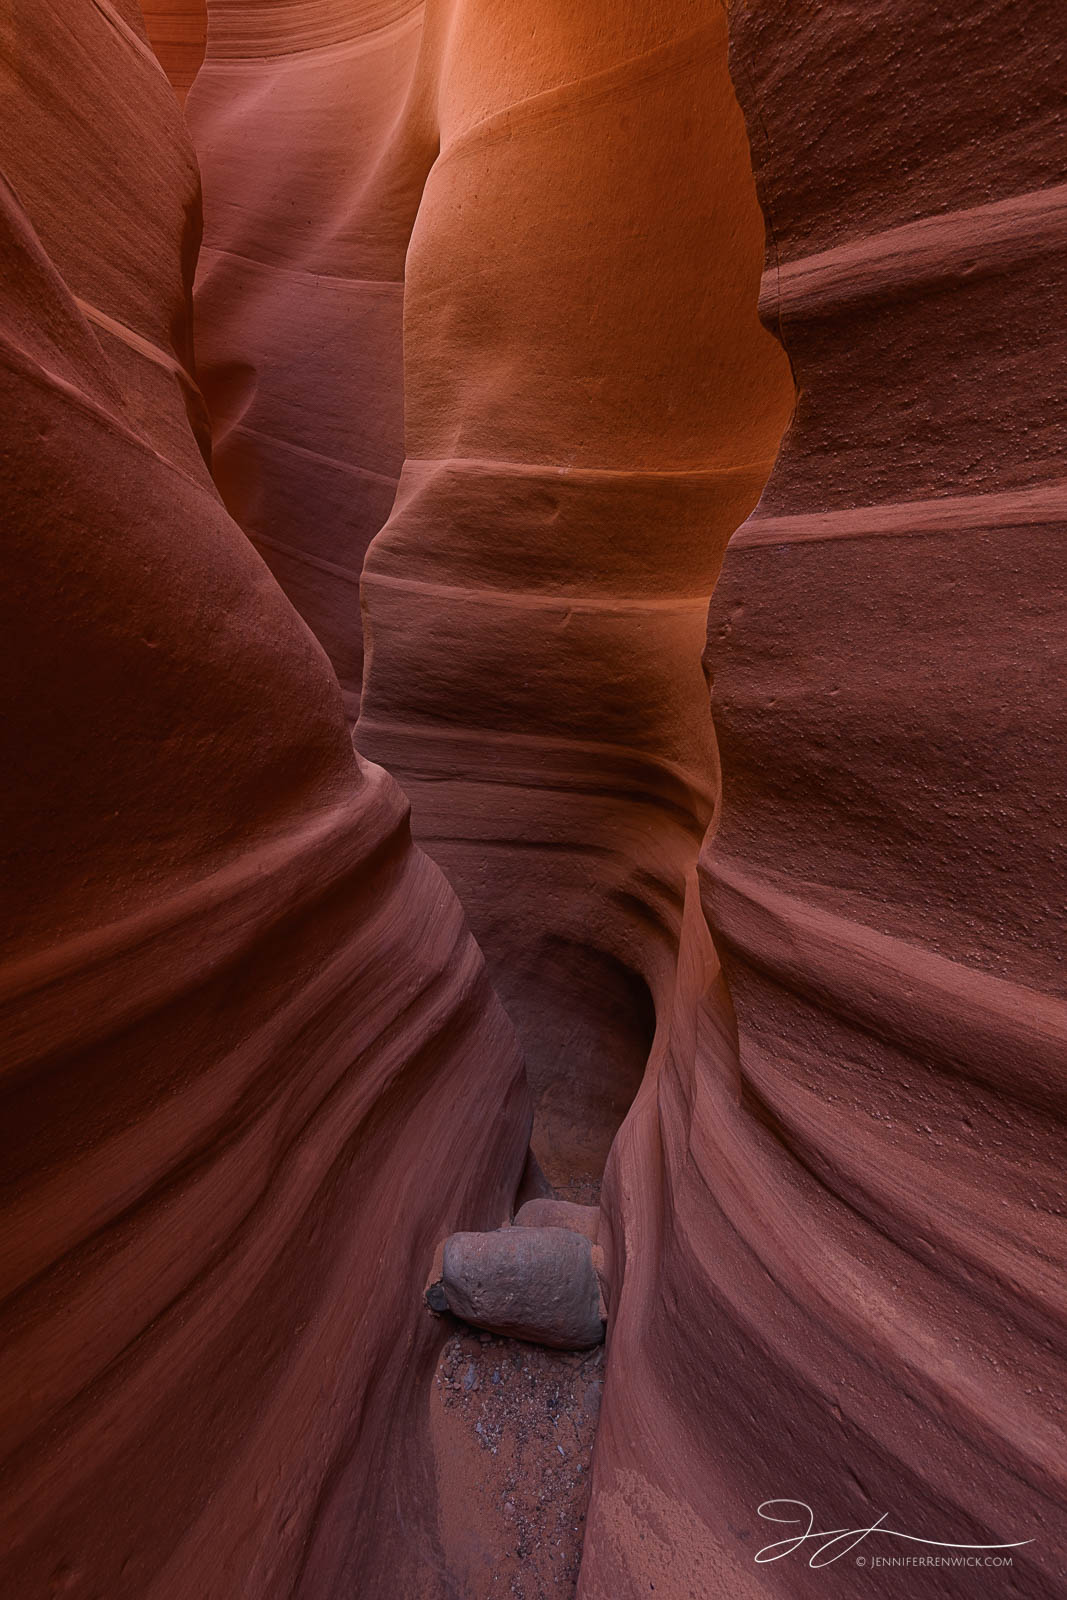 Warm light glows along the walls of a slot canyon, creating warmth from within.